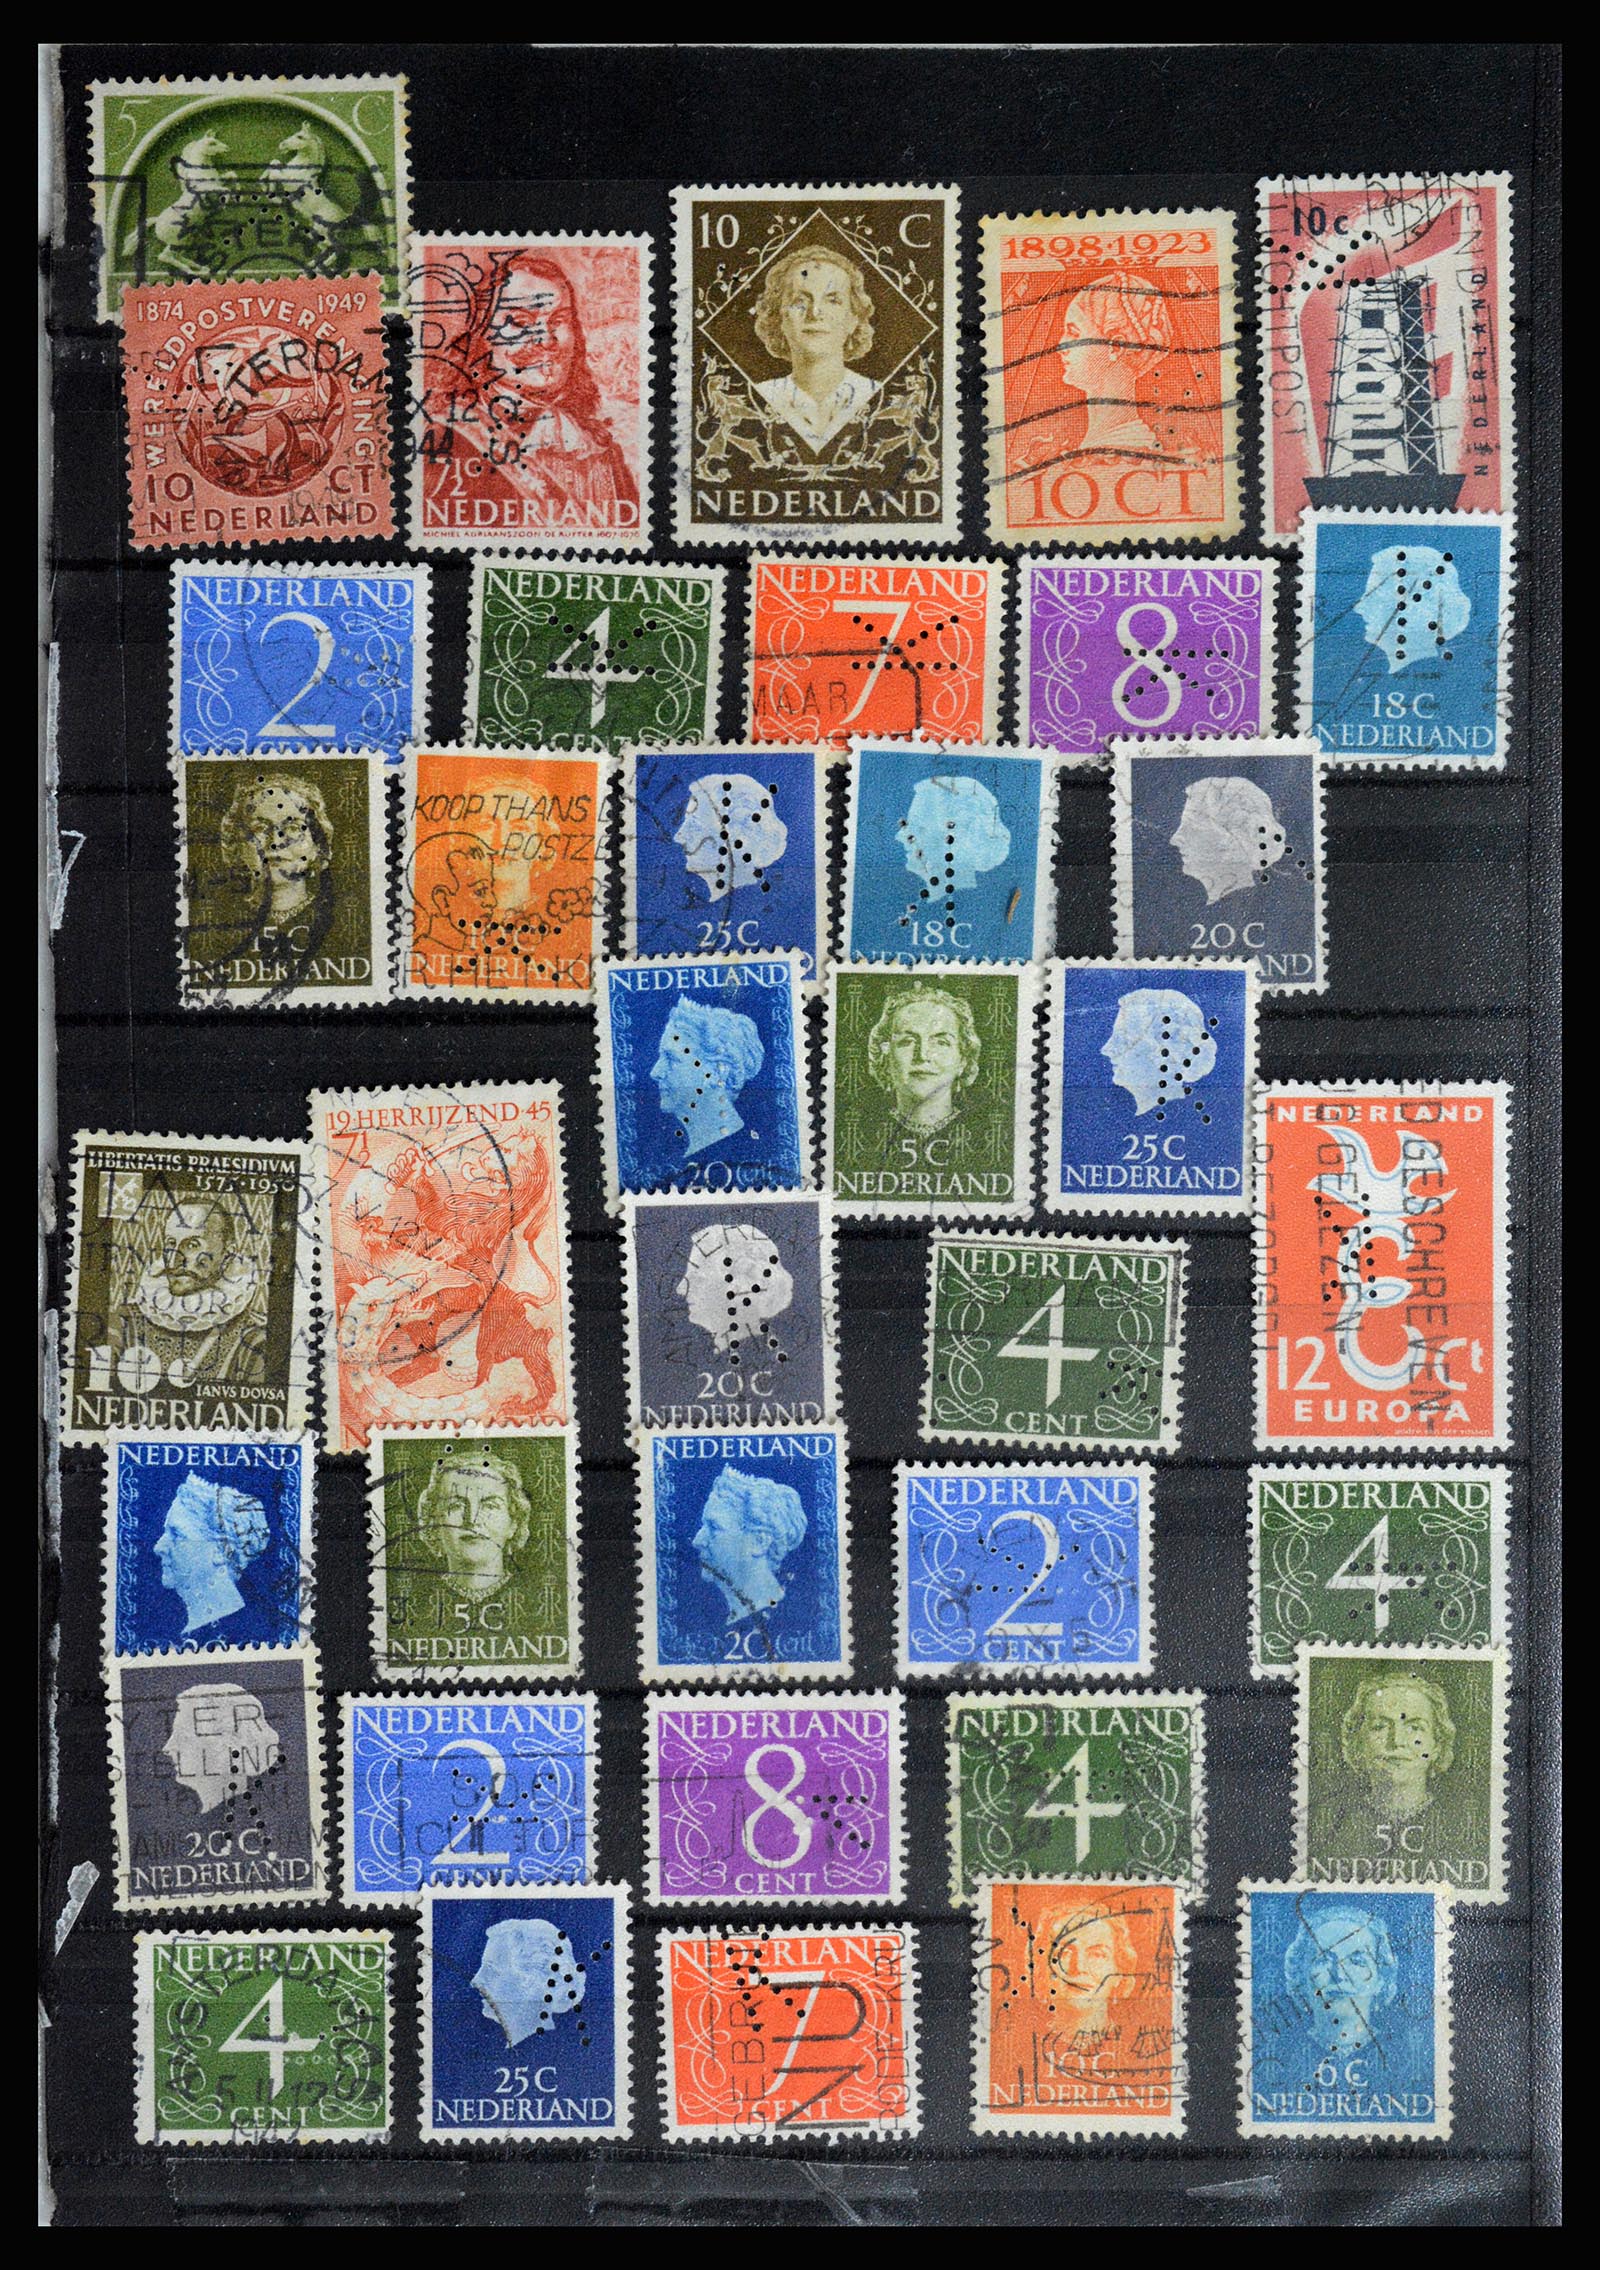 36849 013 - Stamp collection 36849 Netherlands perfins 1891-1960.